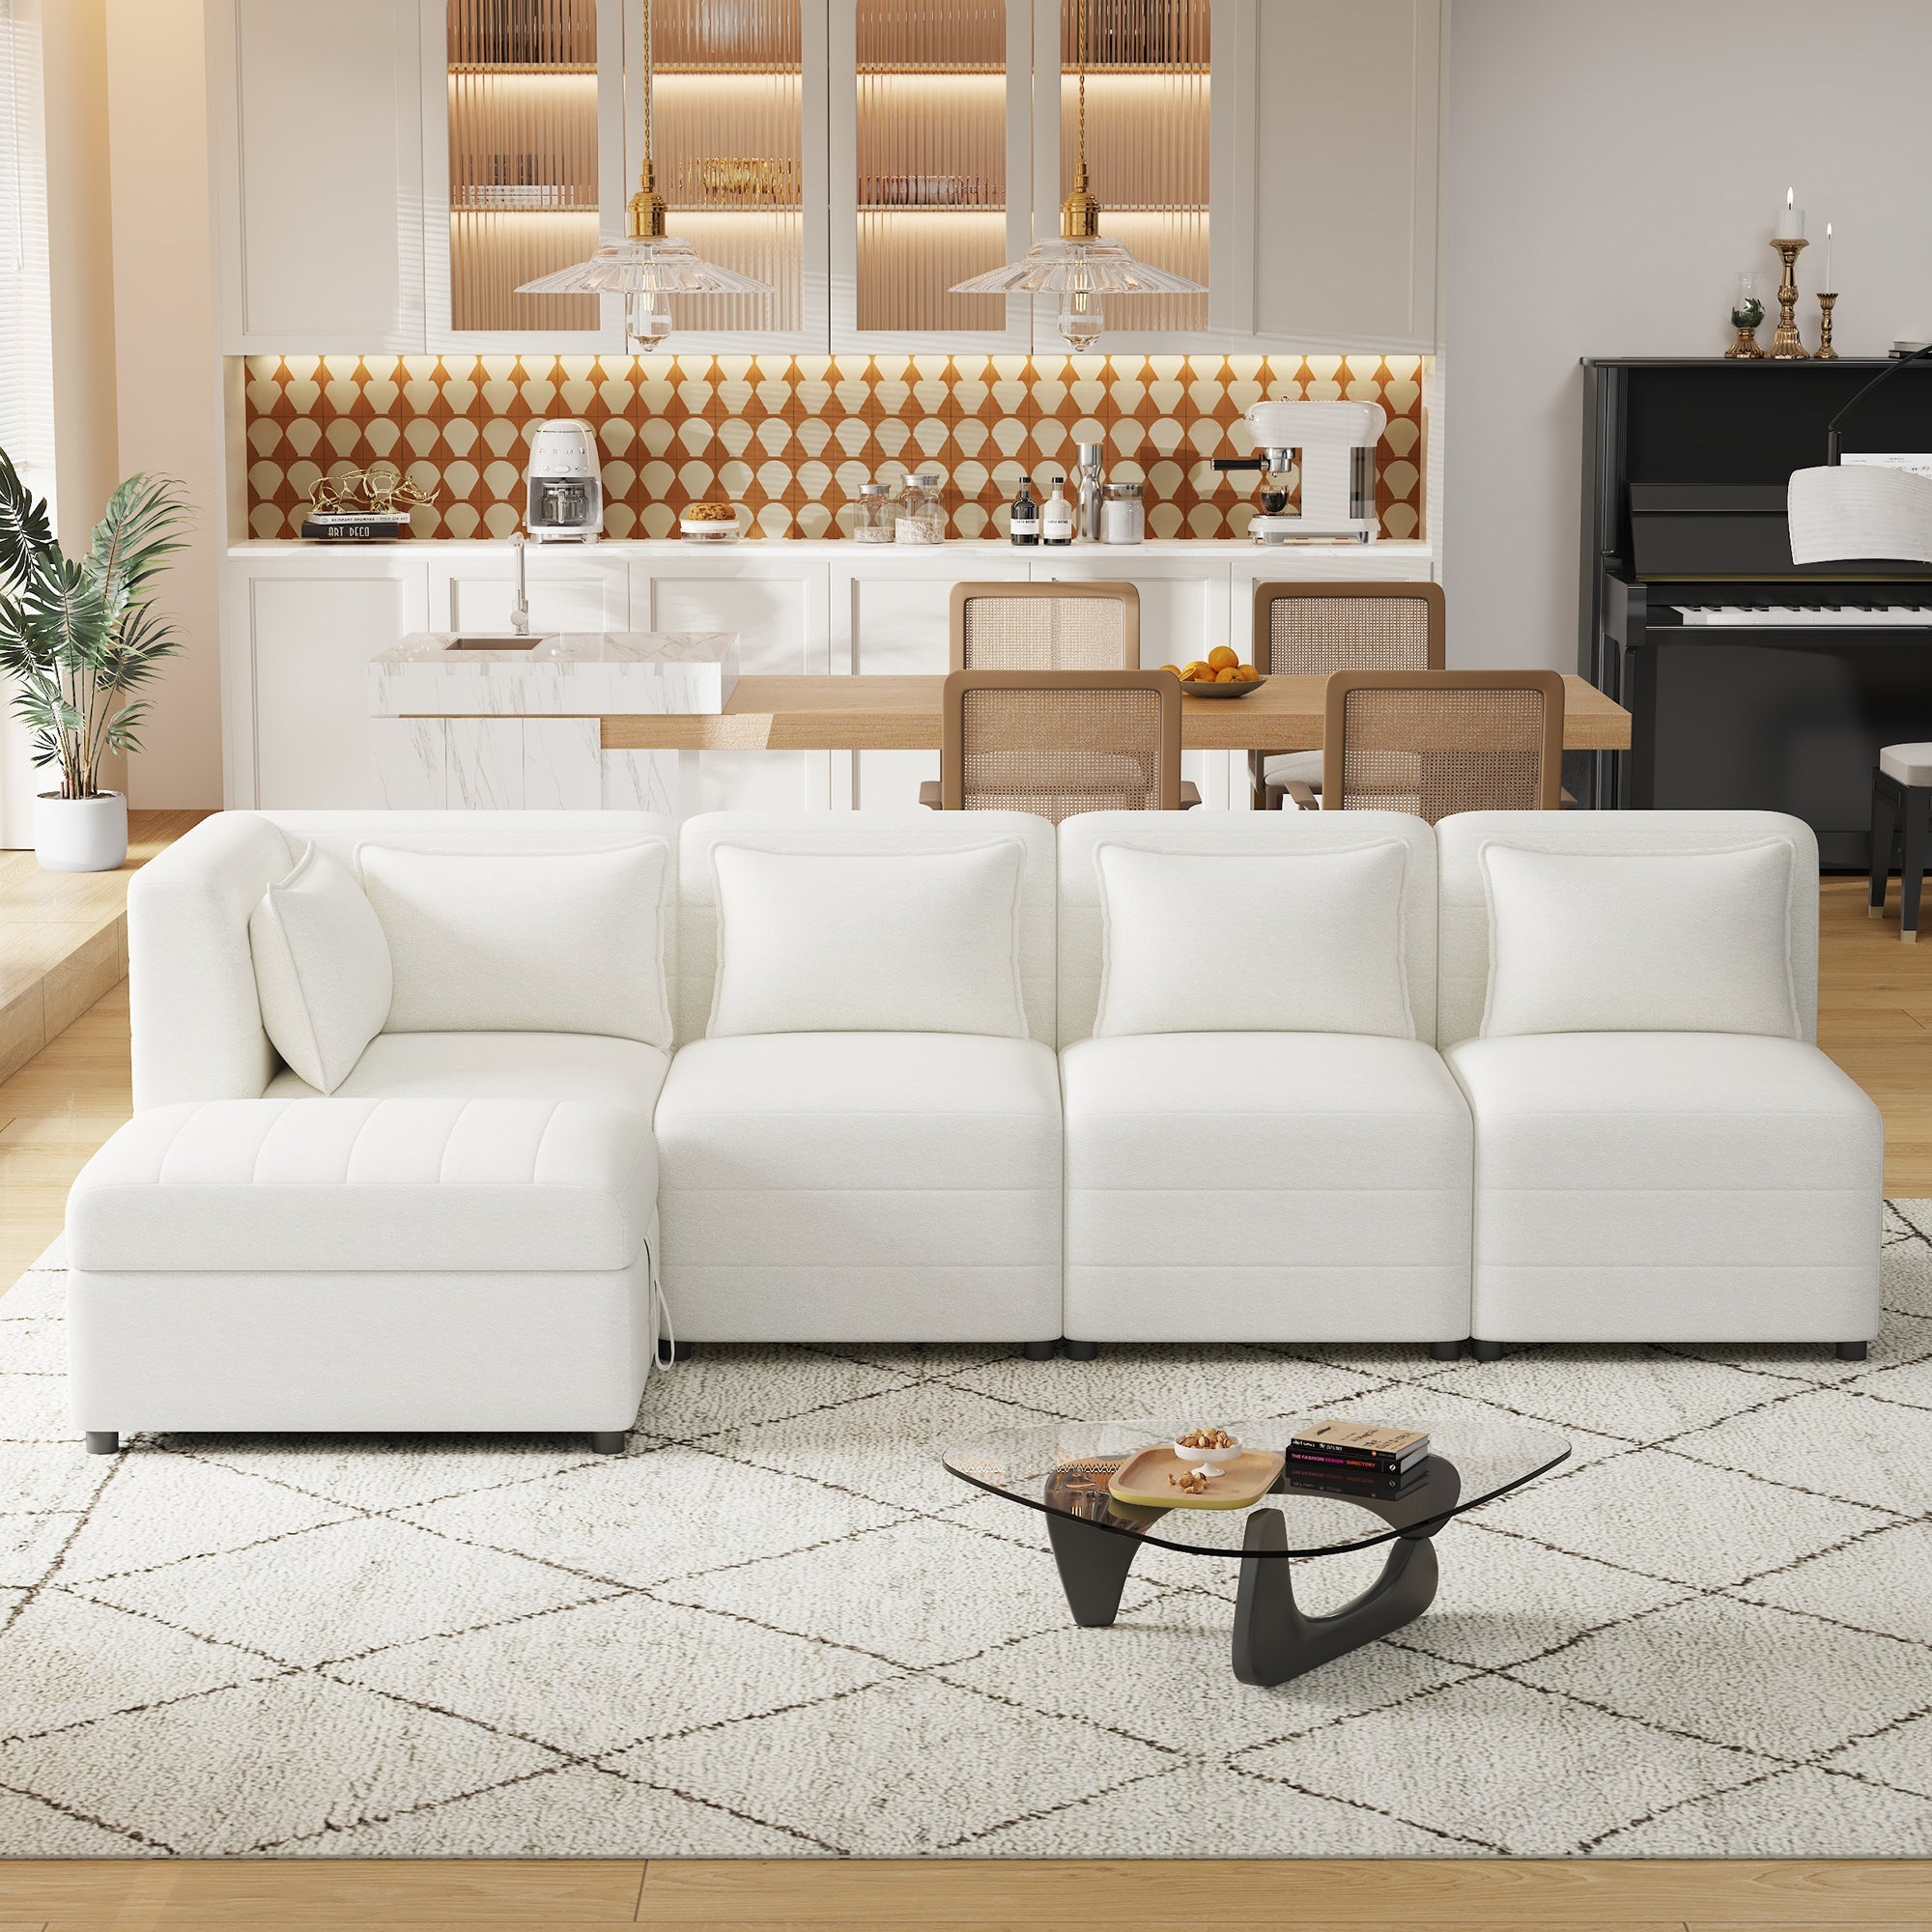 Free-Combined Sectional Sofa 5-seater Modular Couches with Storage